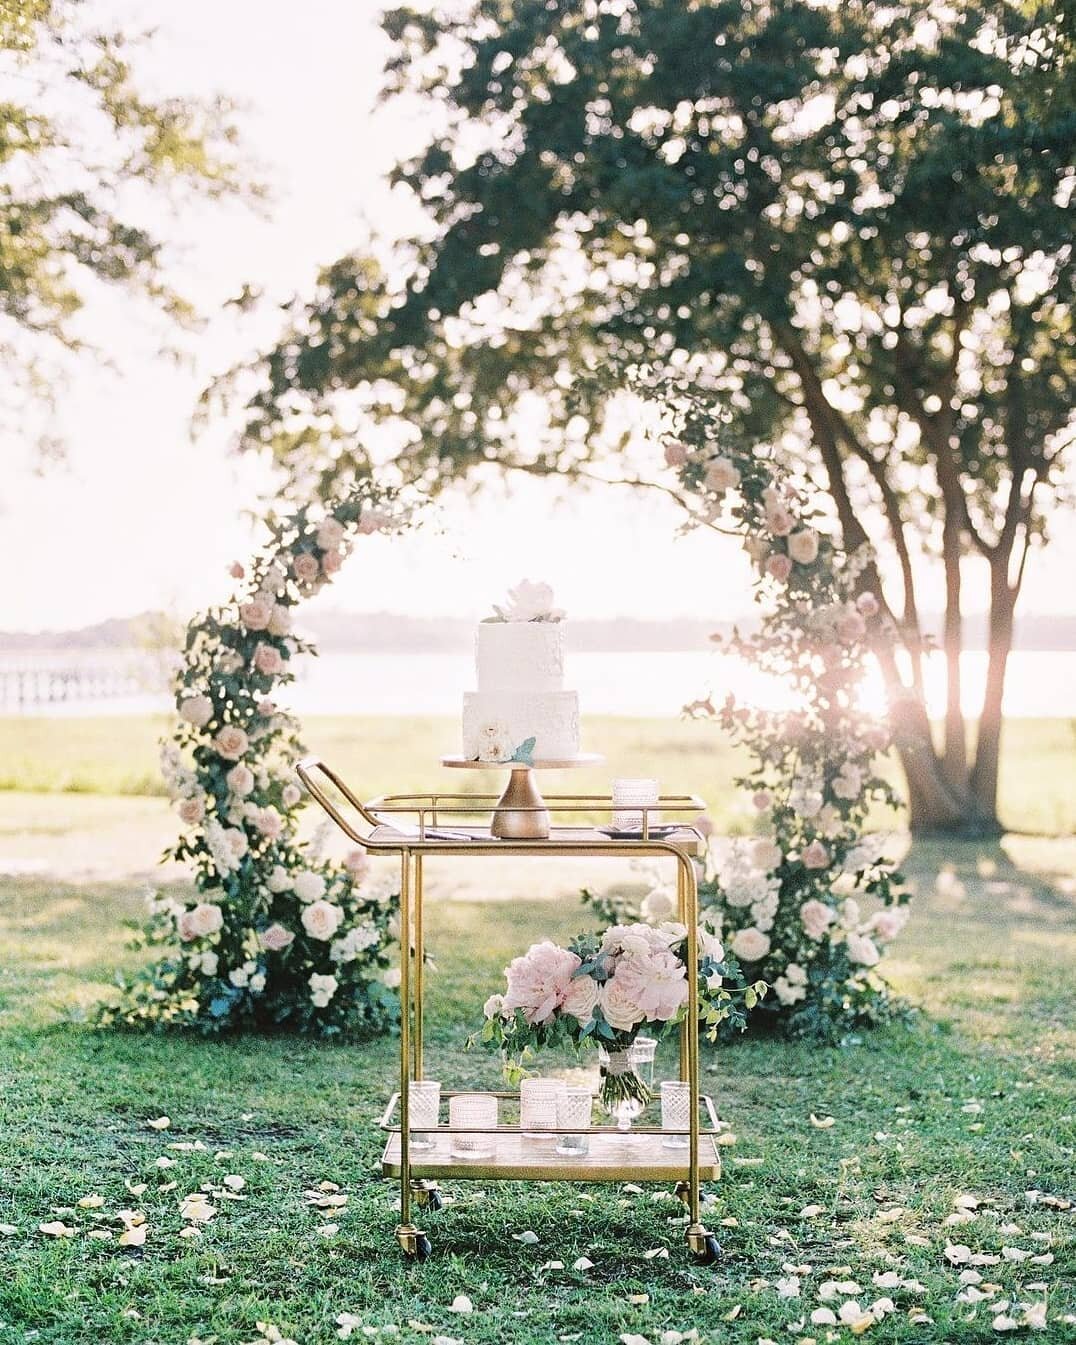 Can we all stop and marvel at this stunning backdrop Whitney at @festooncharleston created at Lowndes Grove for Melissa and Kyle's wedding?! Holy guacamole I'm in loveeeeeeeeee 😍😍😍

Photography by @nicholasgoreweddings 
Planning, design &amp; styl